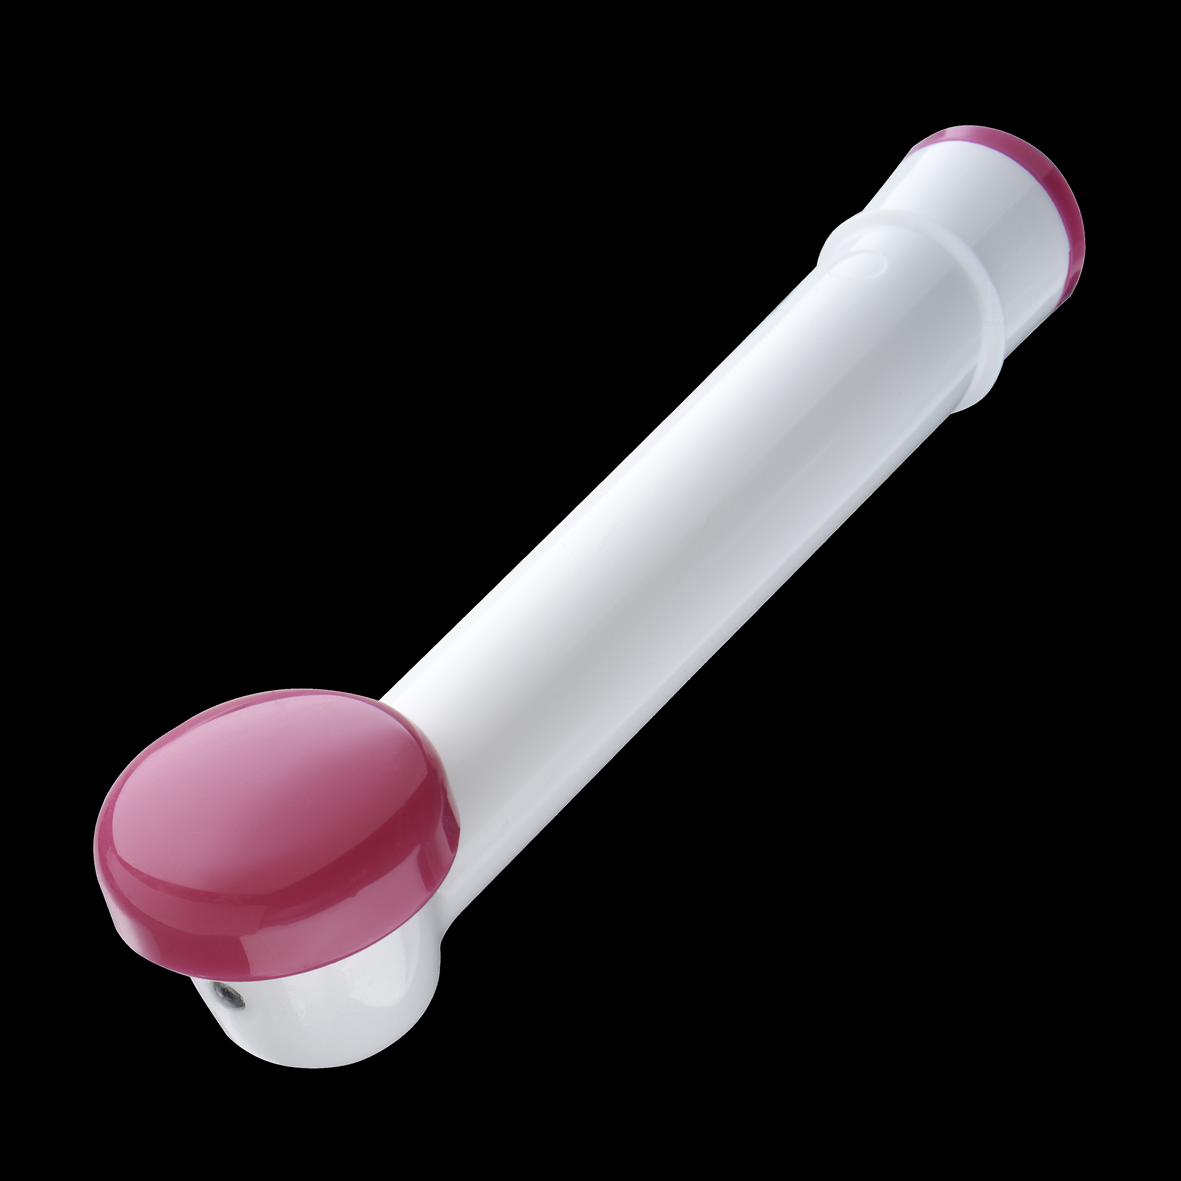 Electric Toothbrush Vibrator Attachment